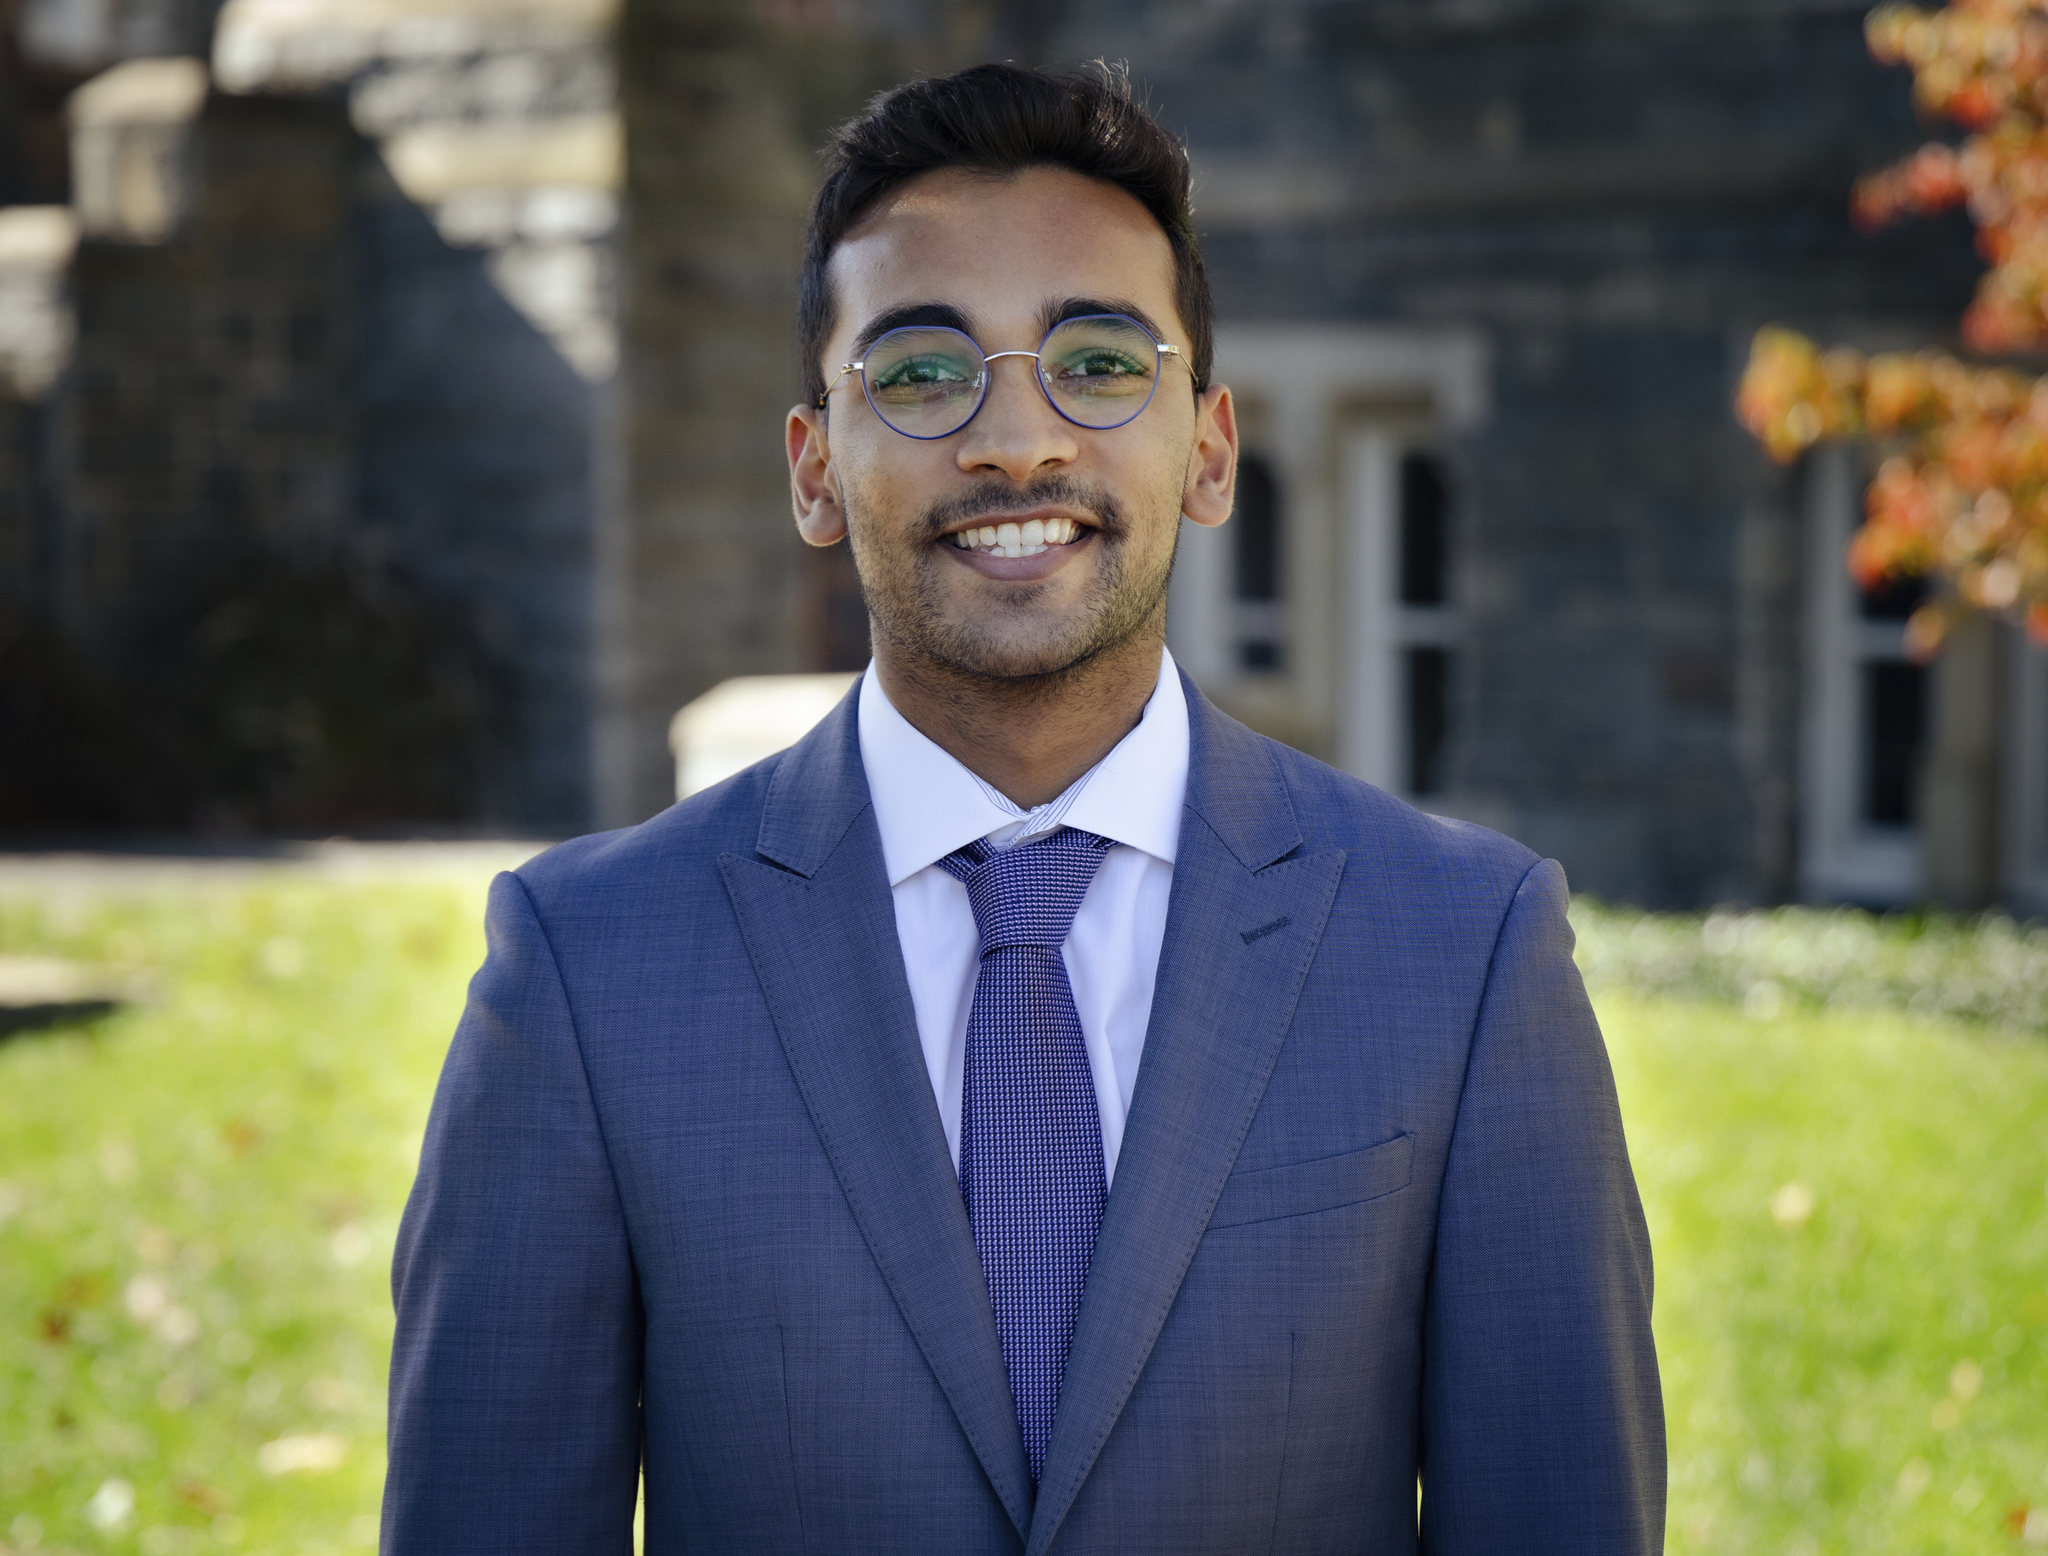 Arjun Ravi wears glasses and a light blue suit for a headshot outside